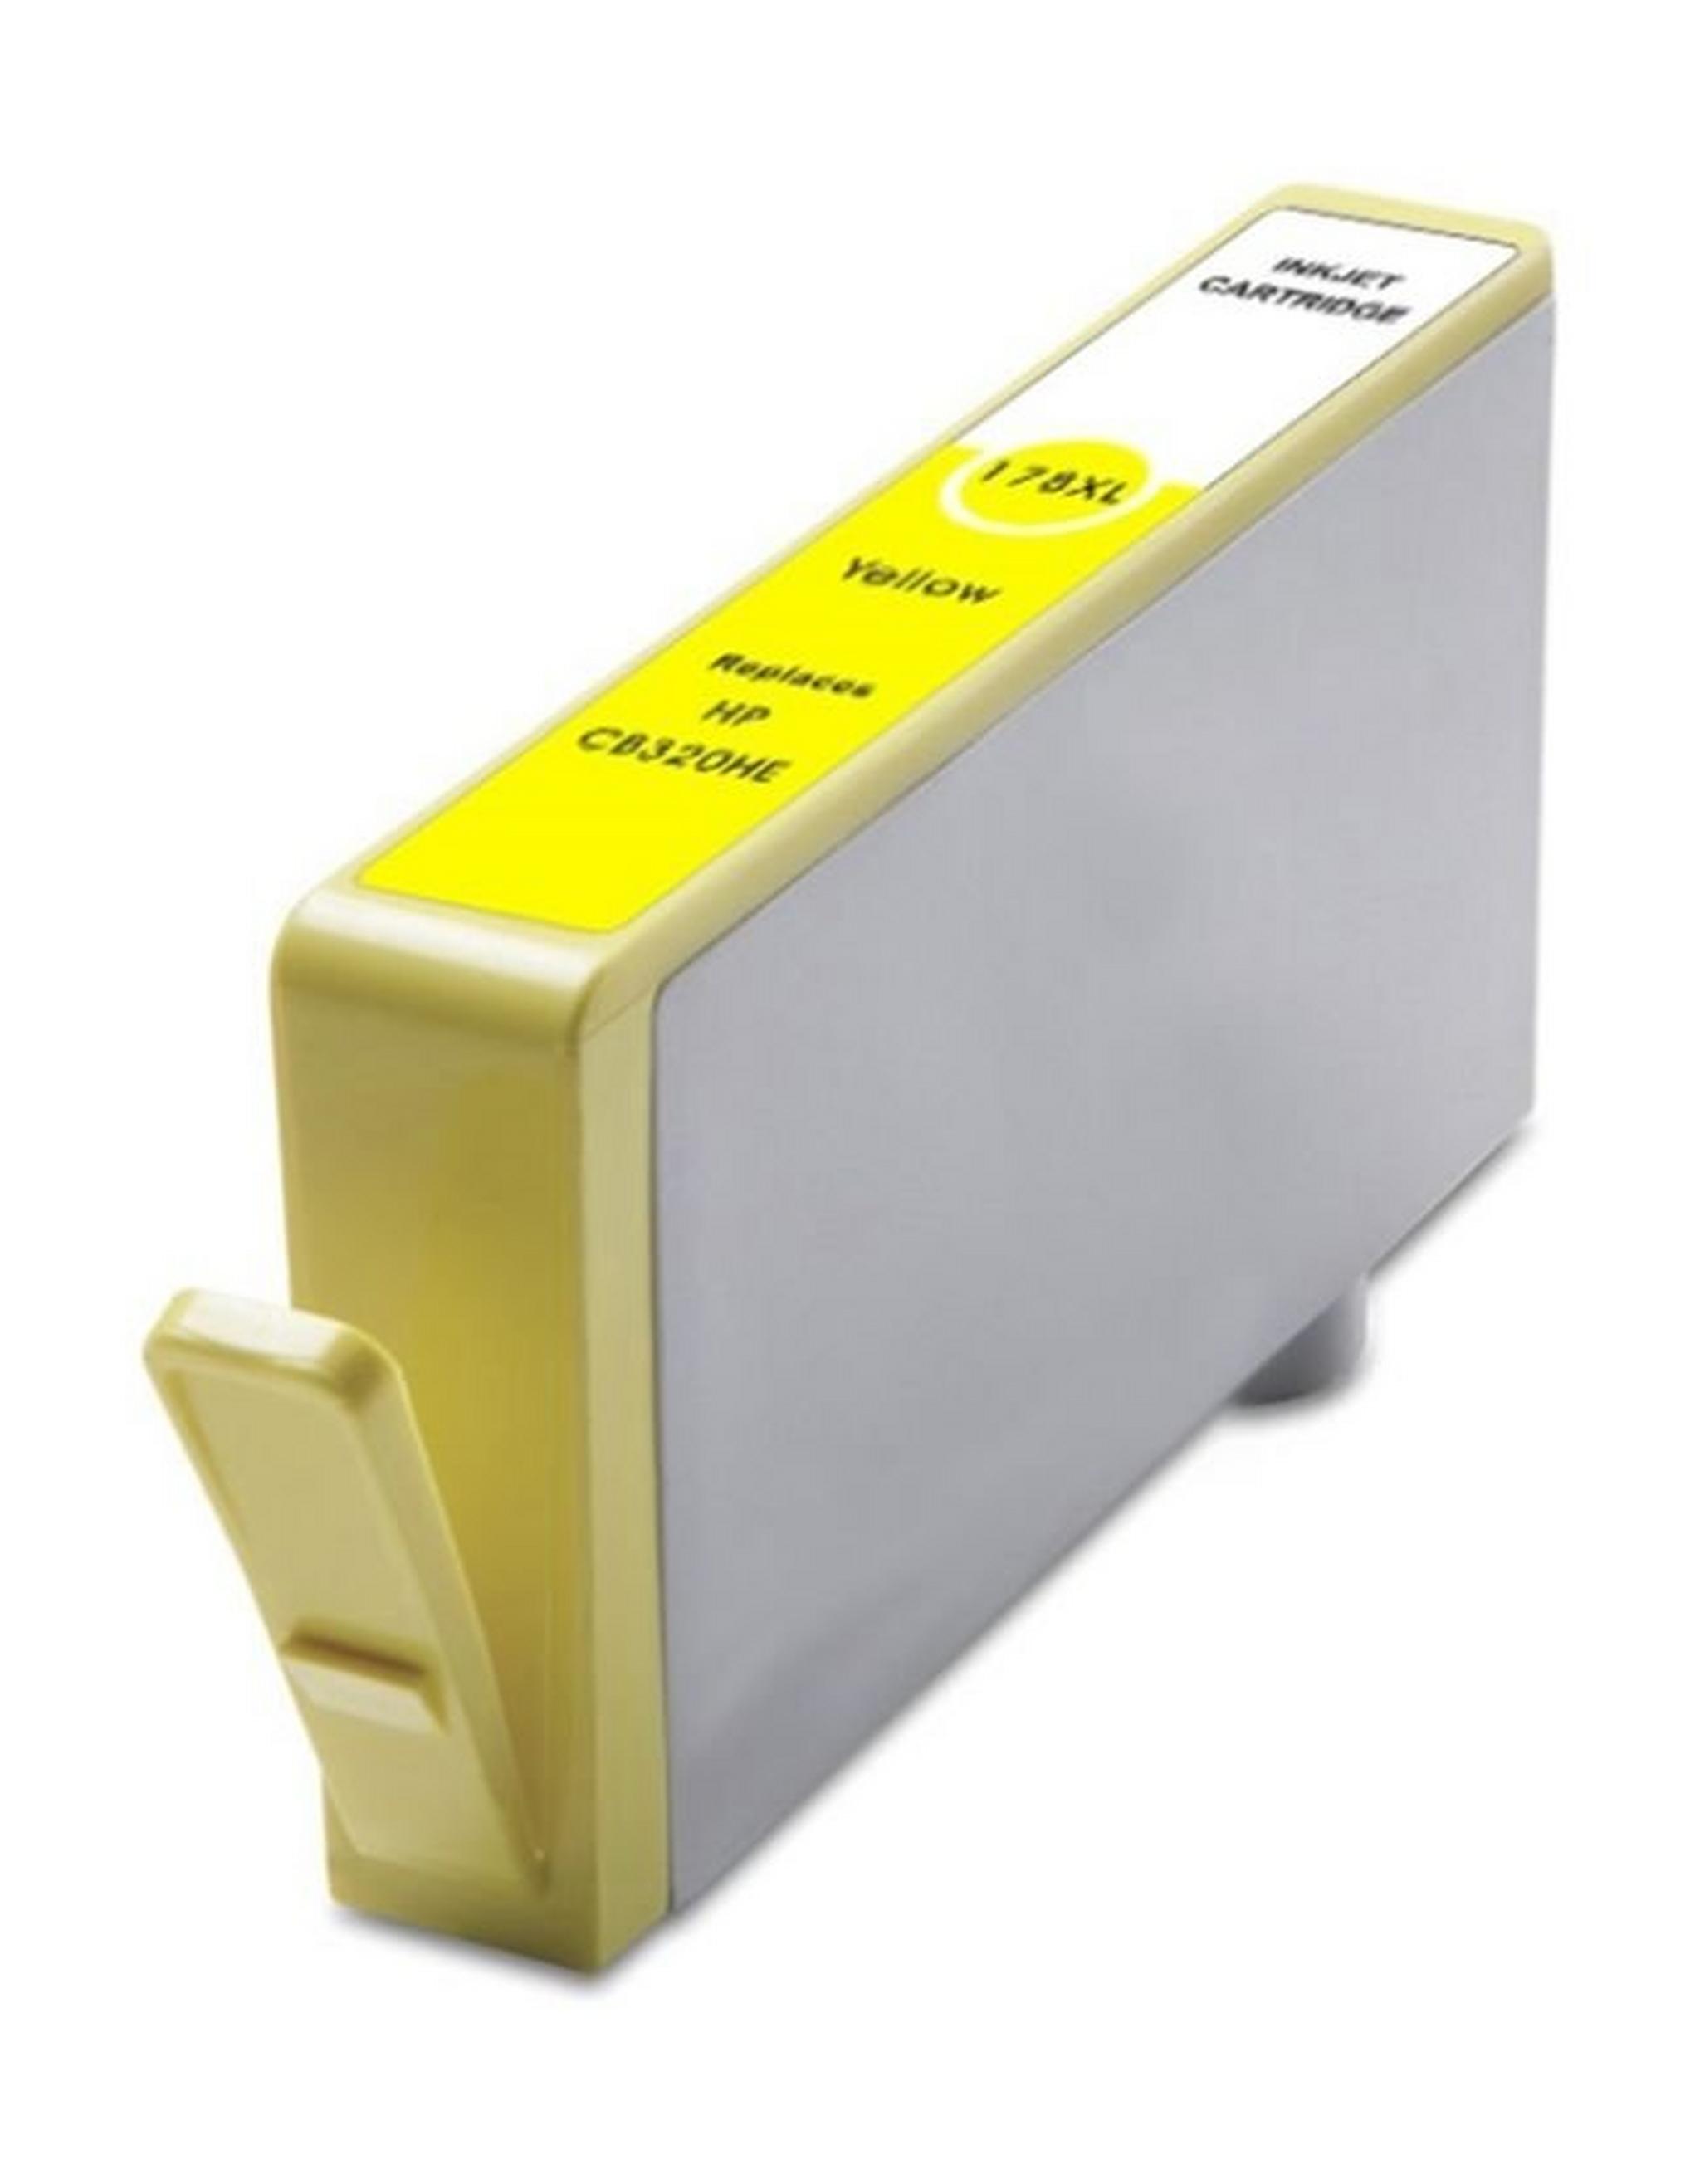 AnyColor 178XL High Yield Ink Cartridge - Yellow